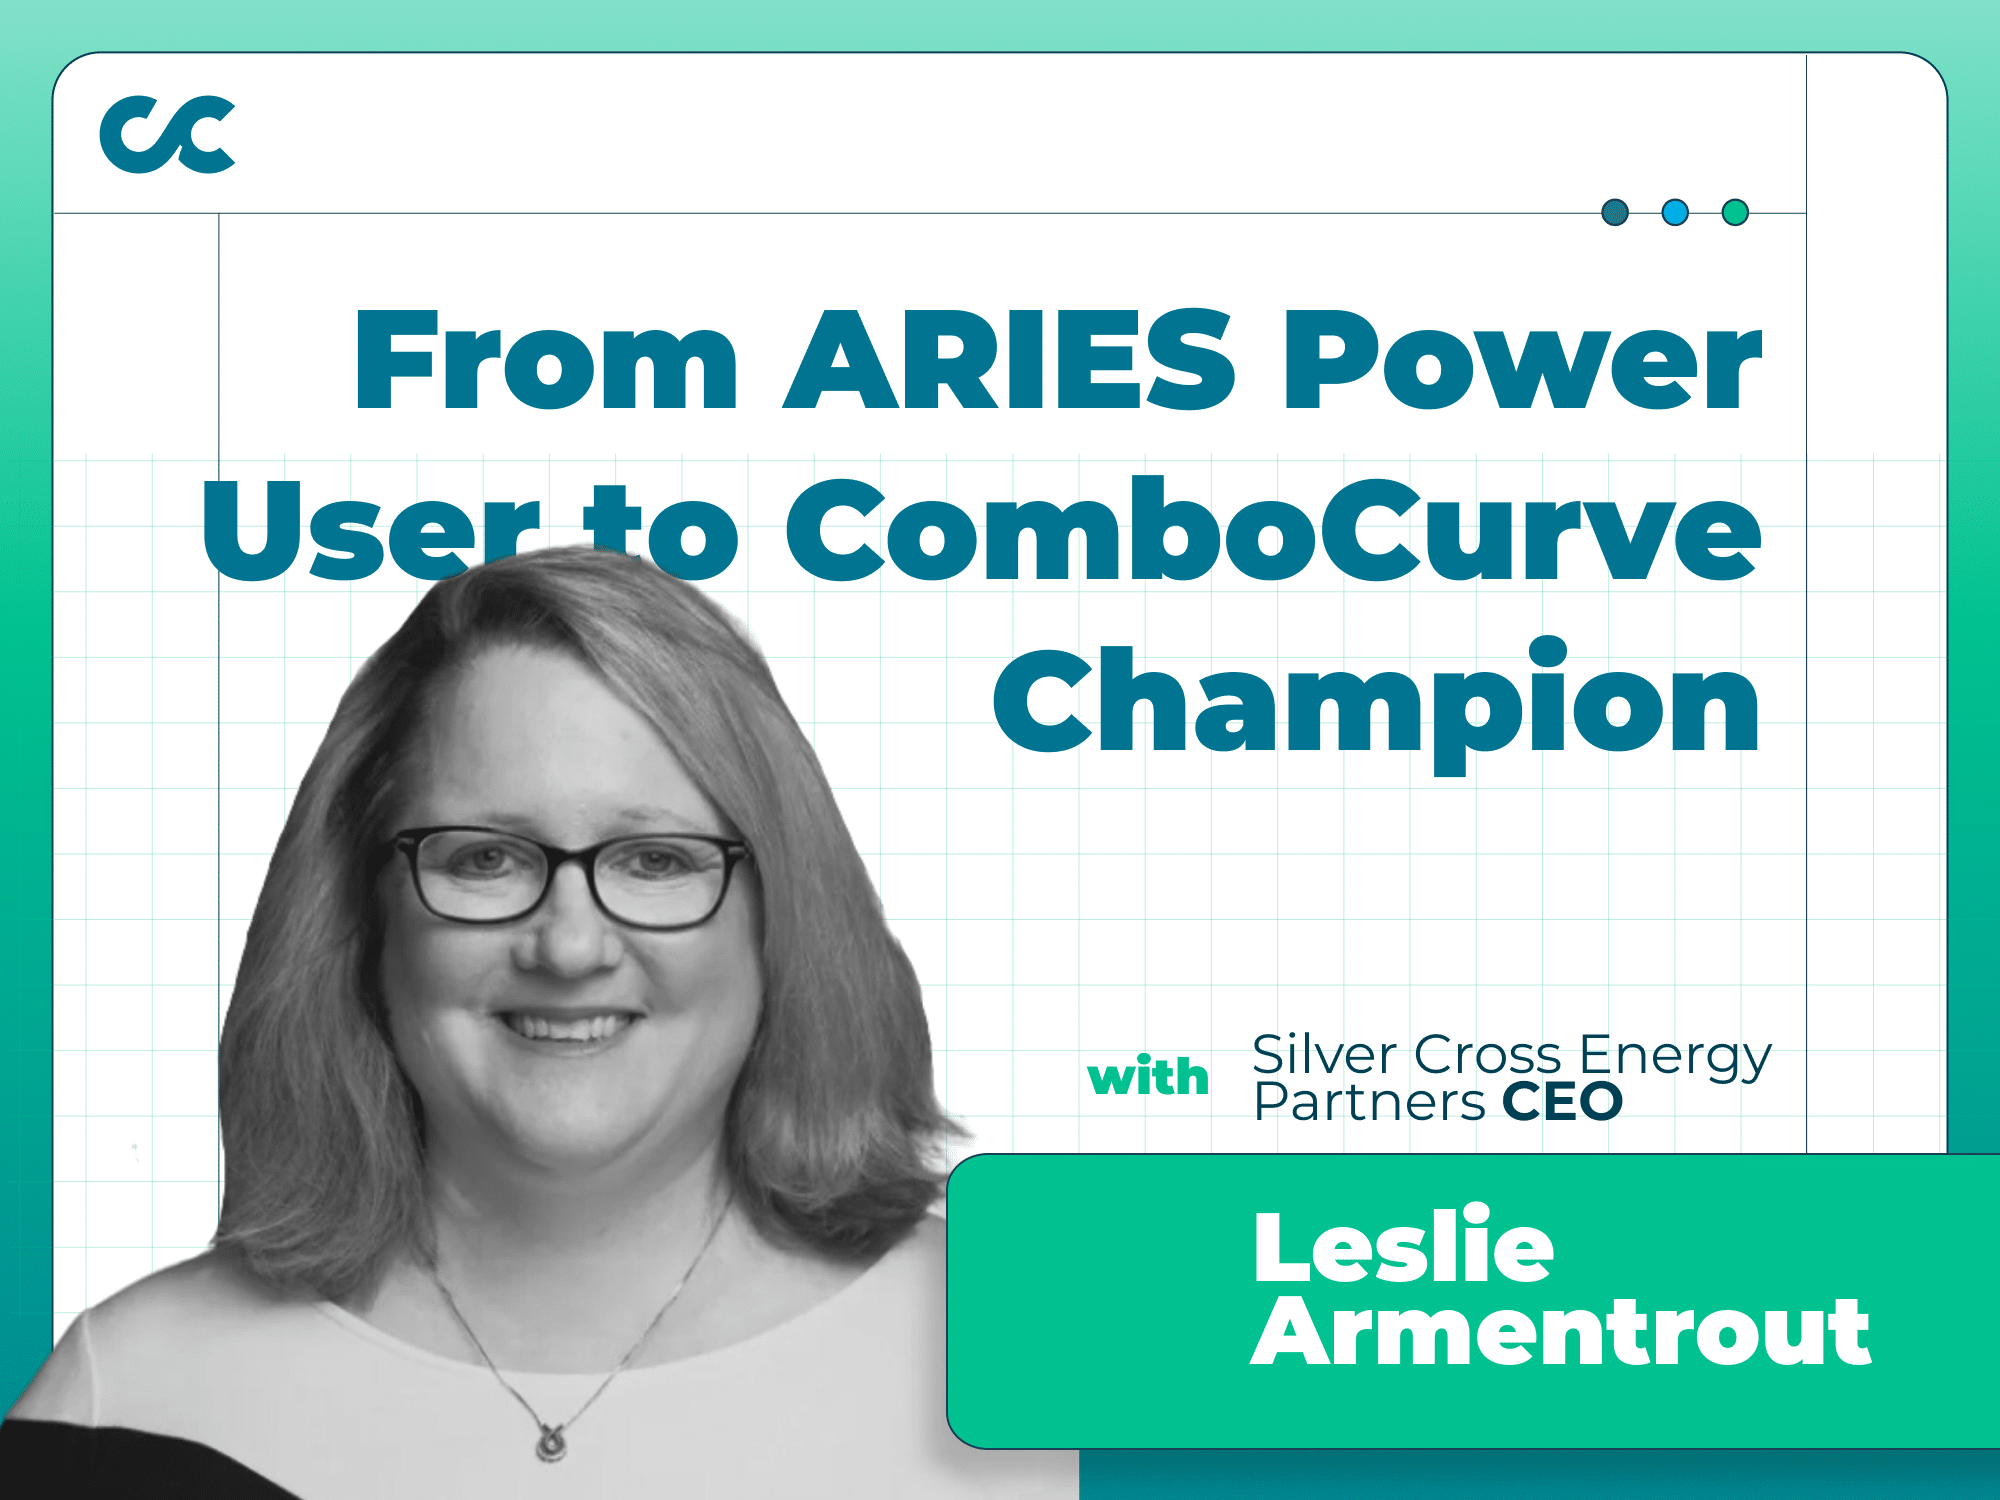 From ARIES power user to ComboCurve champion